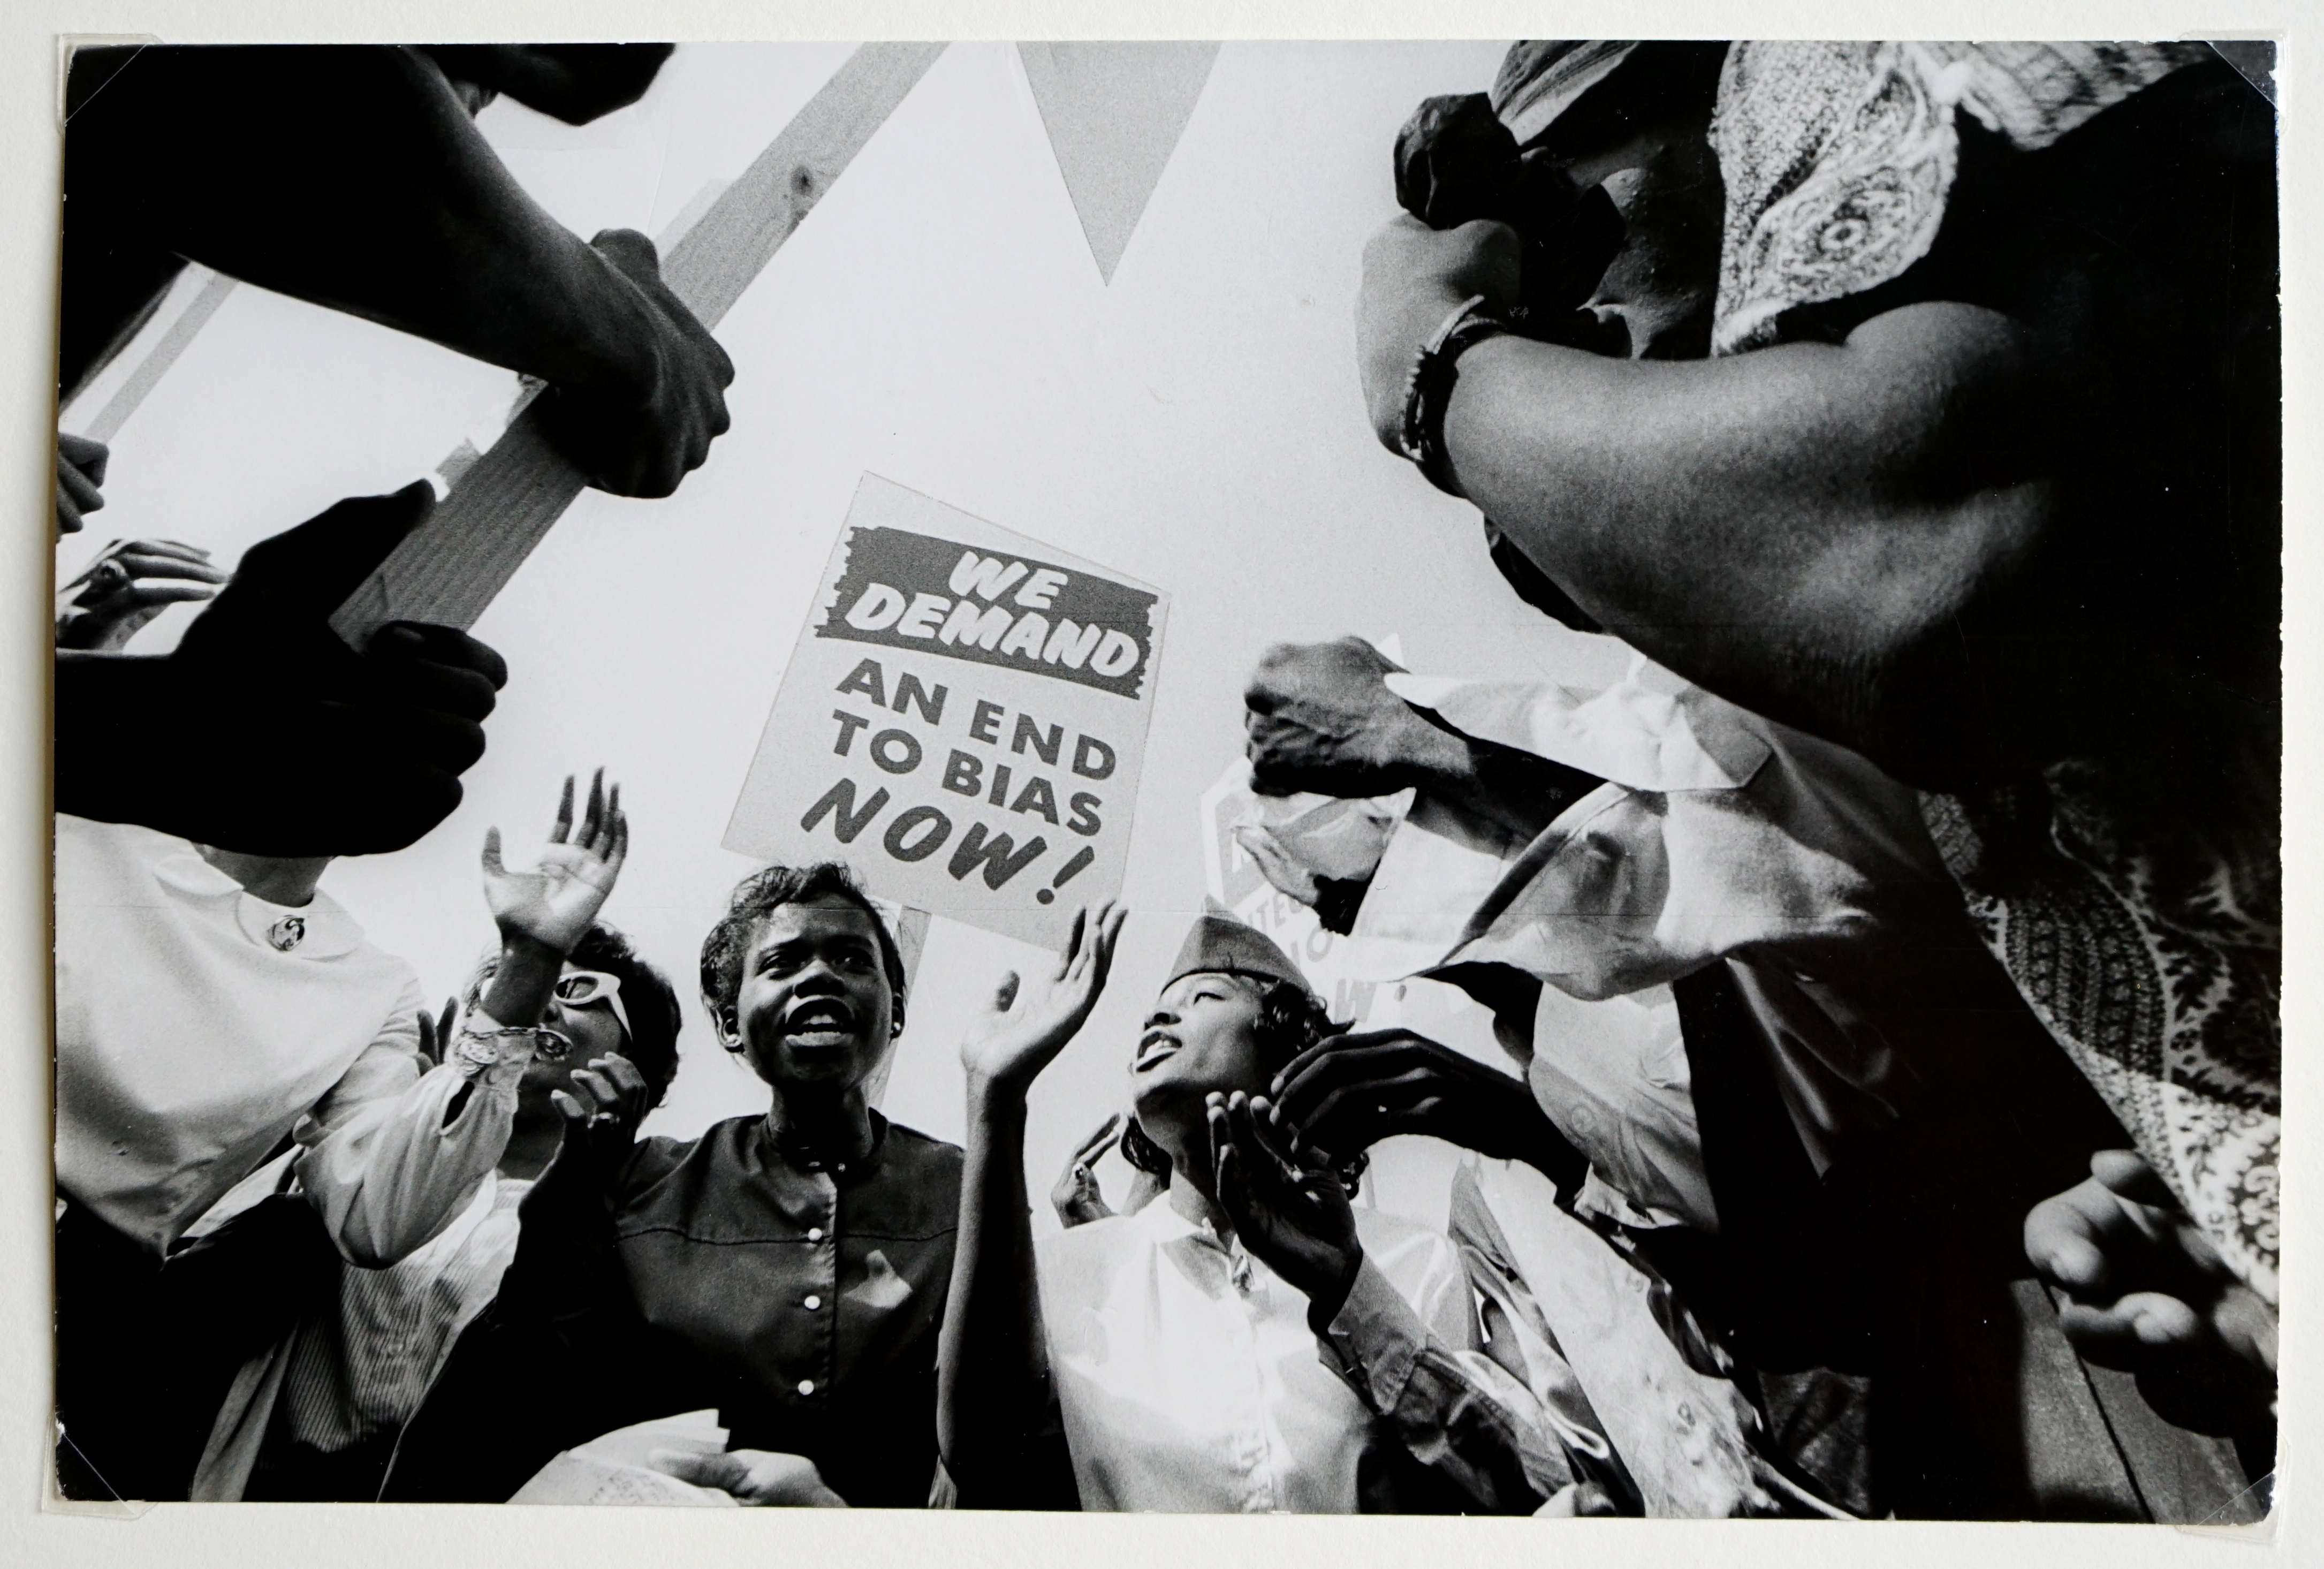 Flip Schulke, We Demand an End to Bias Now!, August 28, 1963. Courtesy of Thomas J. Wilson and Jill M. Garling.